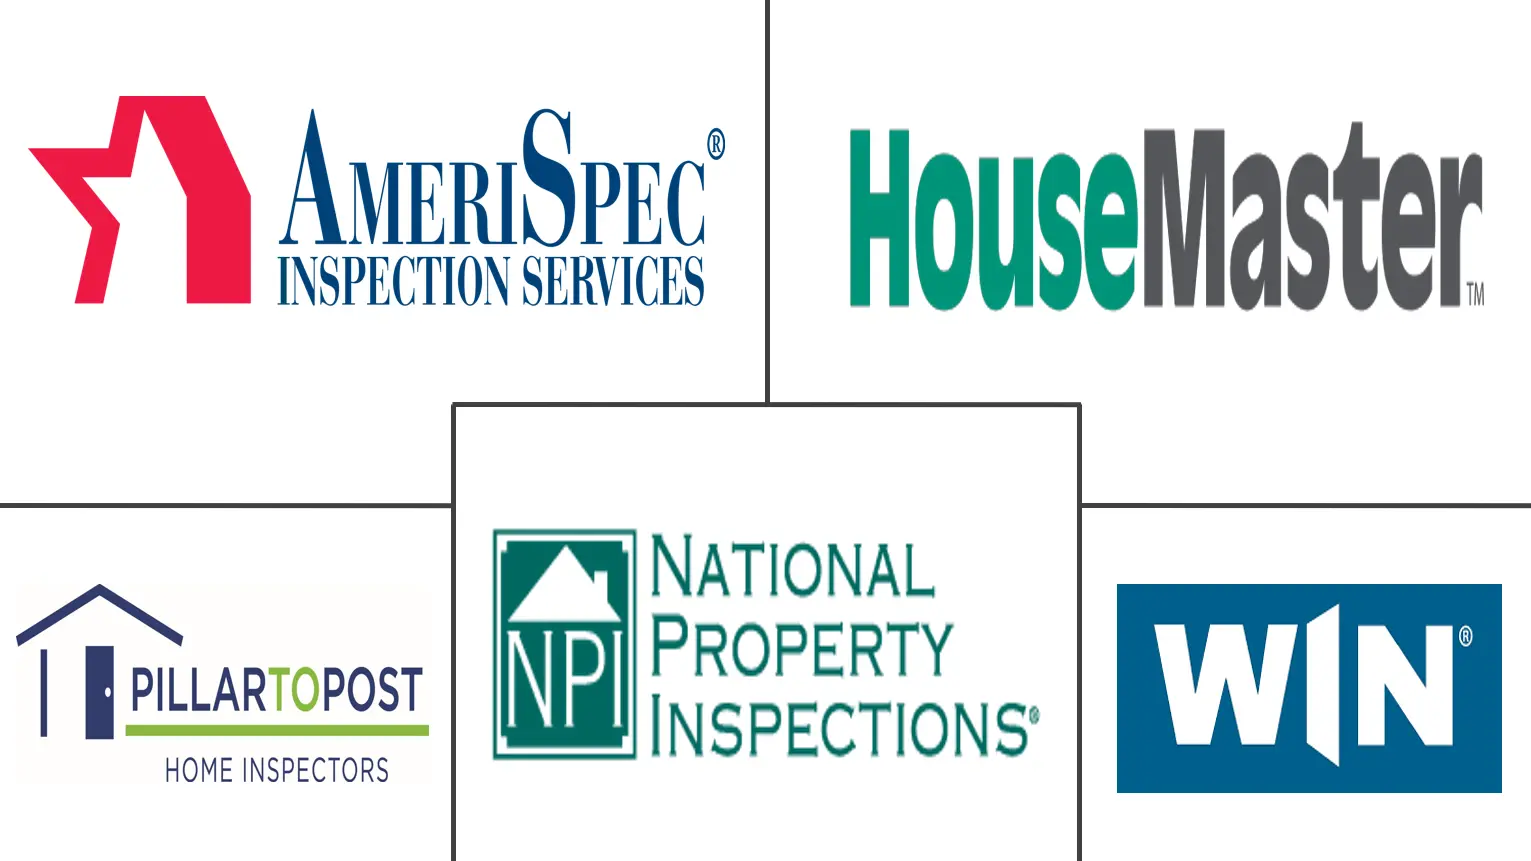 Building Inspection Services Market Key Players